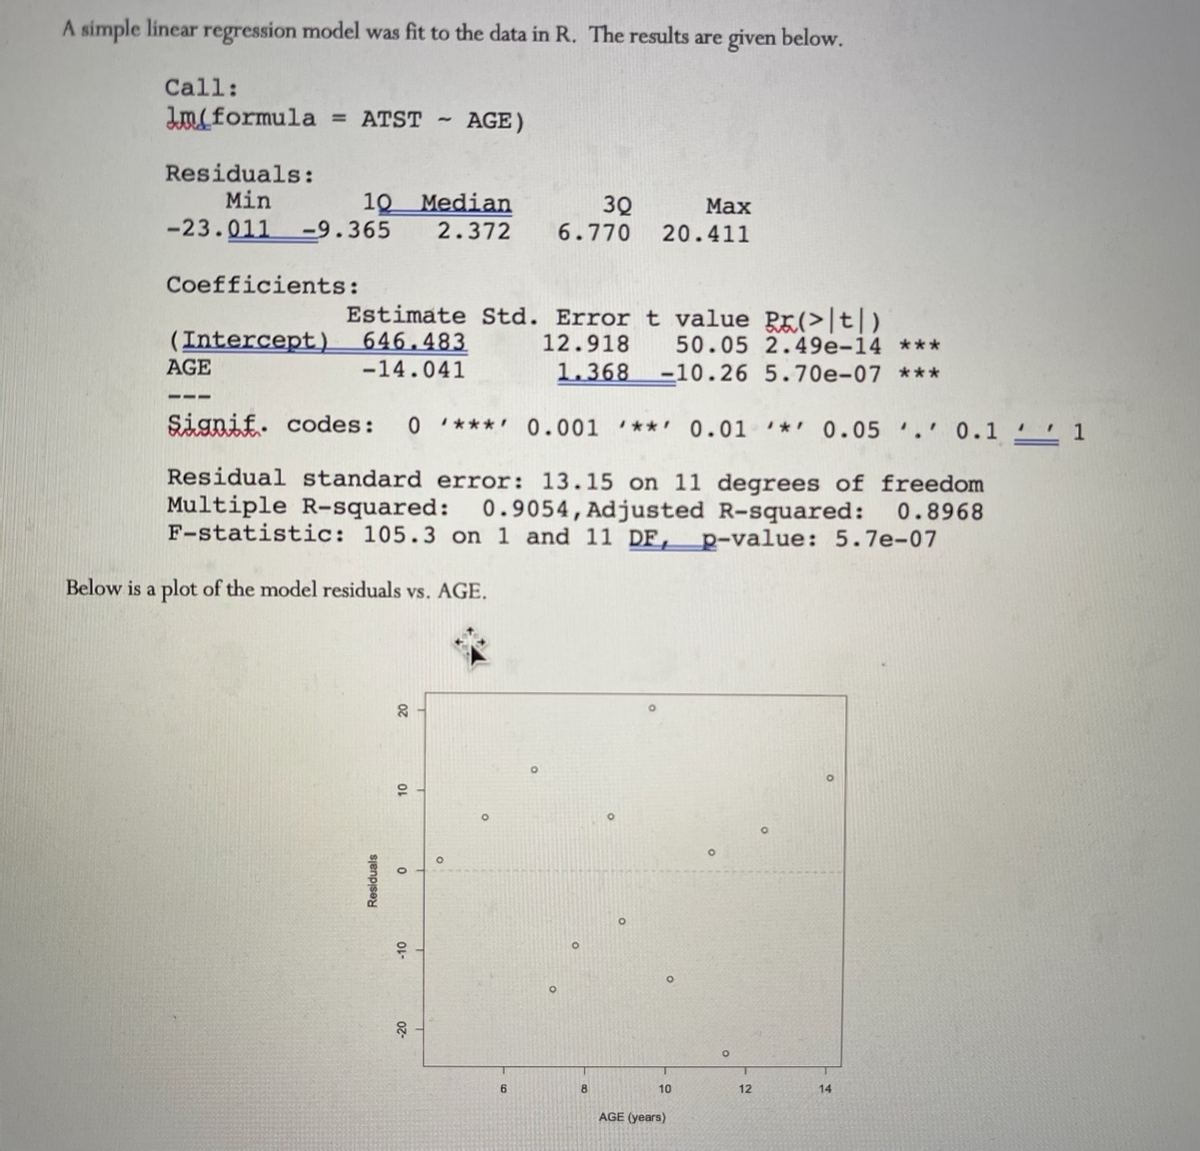 A simple linear regression model was fit to the data in R. The results are given below.
Call:
m(formula = ATST
Residuals:
Min
Coefficients:
10 Median
3Q
Max
-23.011 -9.365 2.372 6.770 20.411
Estimate Std. Error t value (>|t|)
12.918 50.05 2.49e-14 ***
1.368 -10.26 5.70e-07 ***
Signif. codes: 0 **** 0.001** 0.01 * 0.05.' 0.1 1
Residual standard error: 13.15 on 11 degrees of freedom
Multiple R-squared: 0.9054, Adjusted R-squared:
F-statistic: 105.3 on 1 and 11 DF, p-value: 5.7e-07
0.8968
AGE
(Intercept) 646.483
-14.041
Residuals
Below is a plot of the model residuals vs. AGE.
20
~
10
AGE)
0
-10
20
6
8
10
AGE (years)
O
12
14